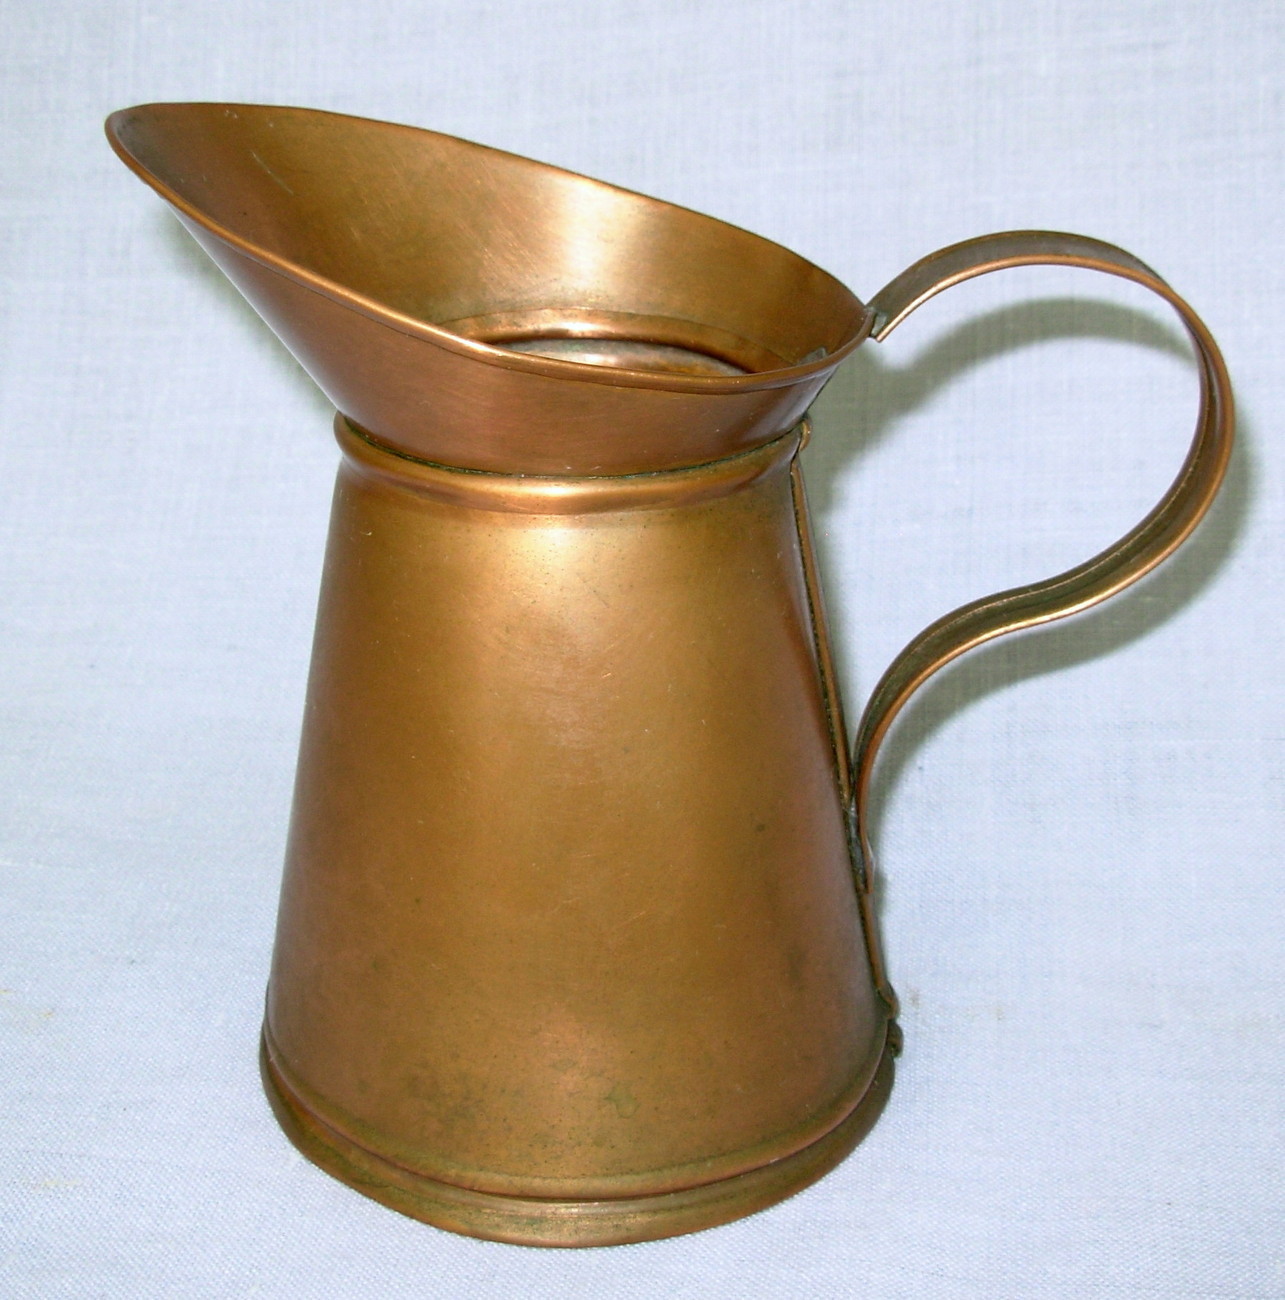 Primary image for vintage OOAK Handmade Handcrafted 6" Solid Copper Pitcher 